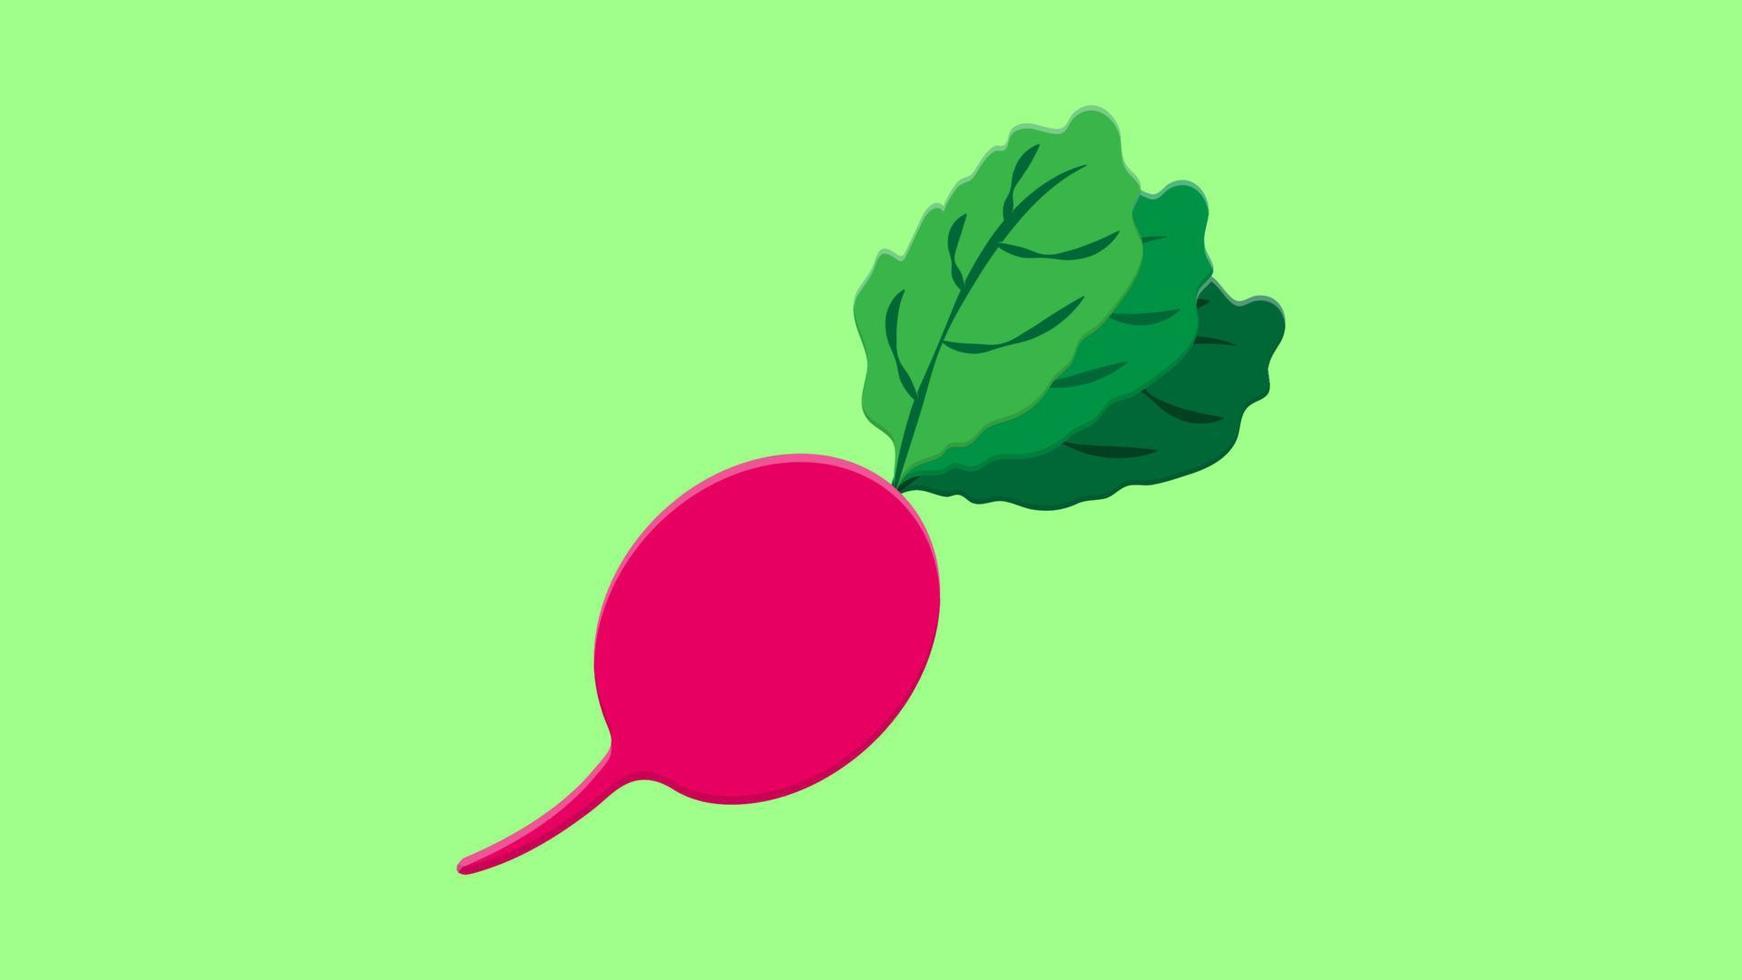 Root radish vegetable with green leaves isolated. Vector vegetarian food, pink root sketch